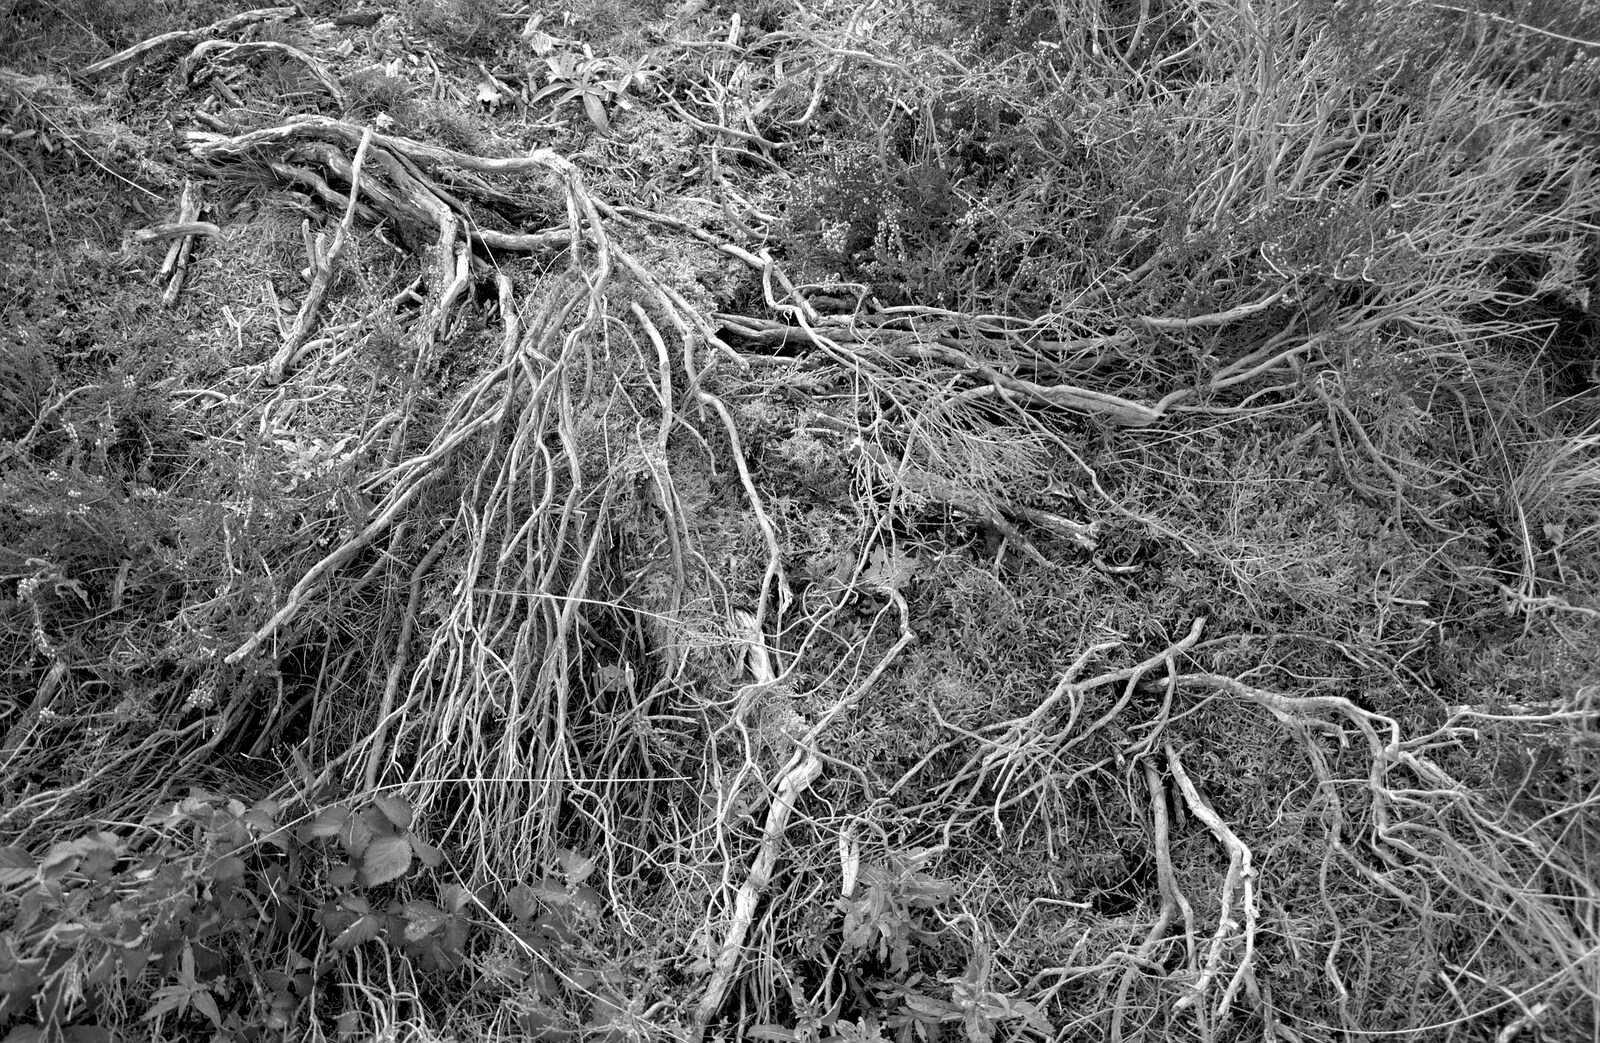 Skeleton branches from Evidence of Autumn: Geocaching on Knettishall Heath, Suffolk - 7th October 2018